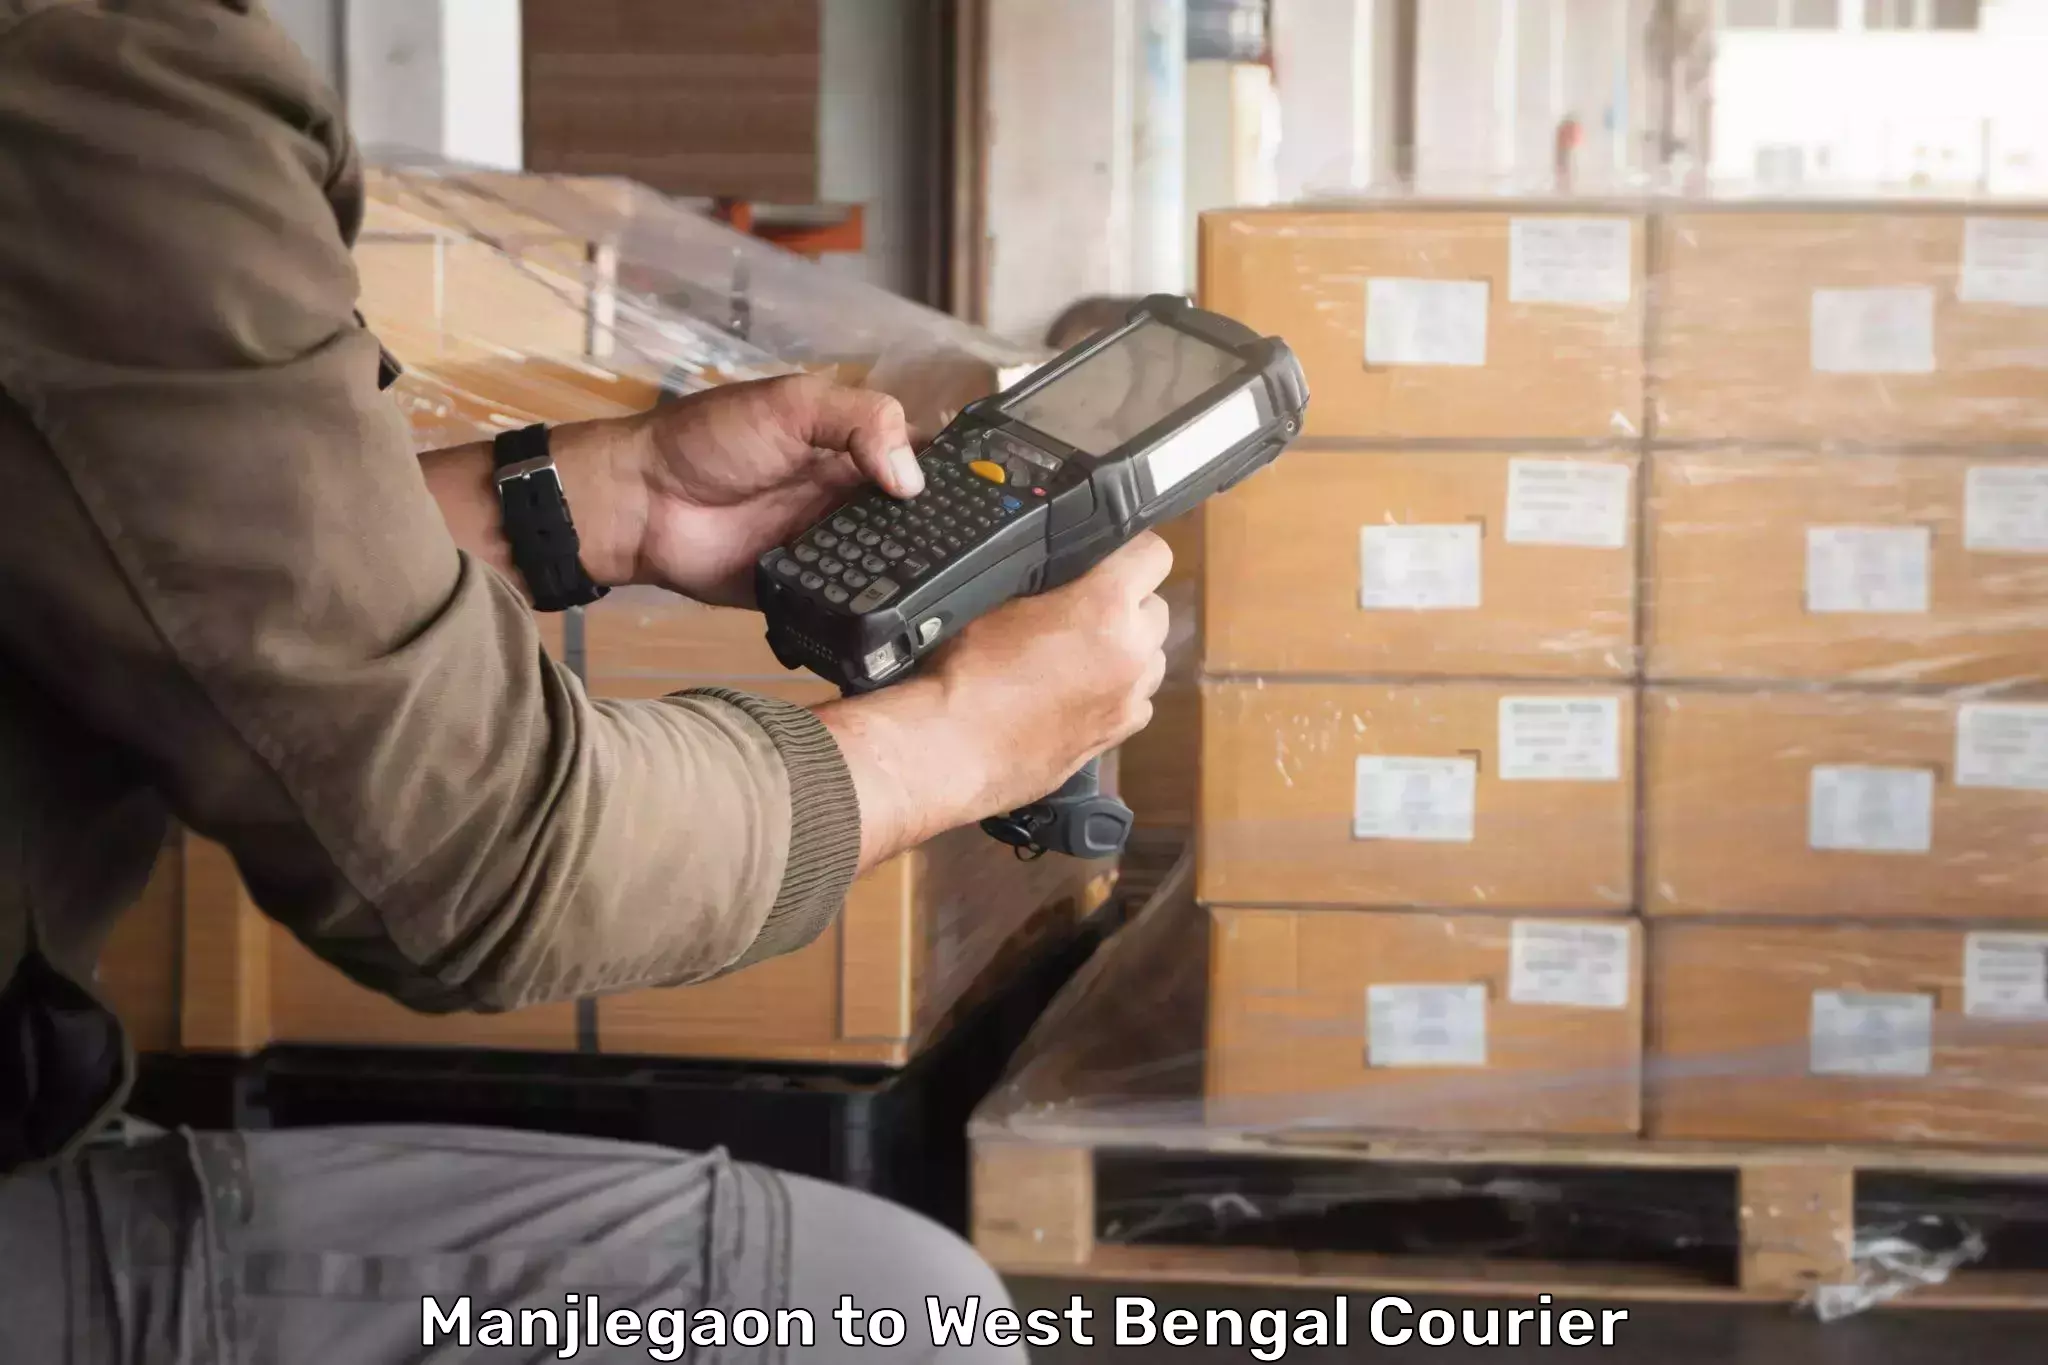 Nationwide courier service Manjlegaon to Hooghly